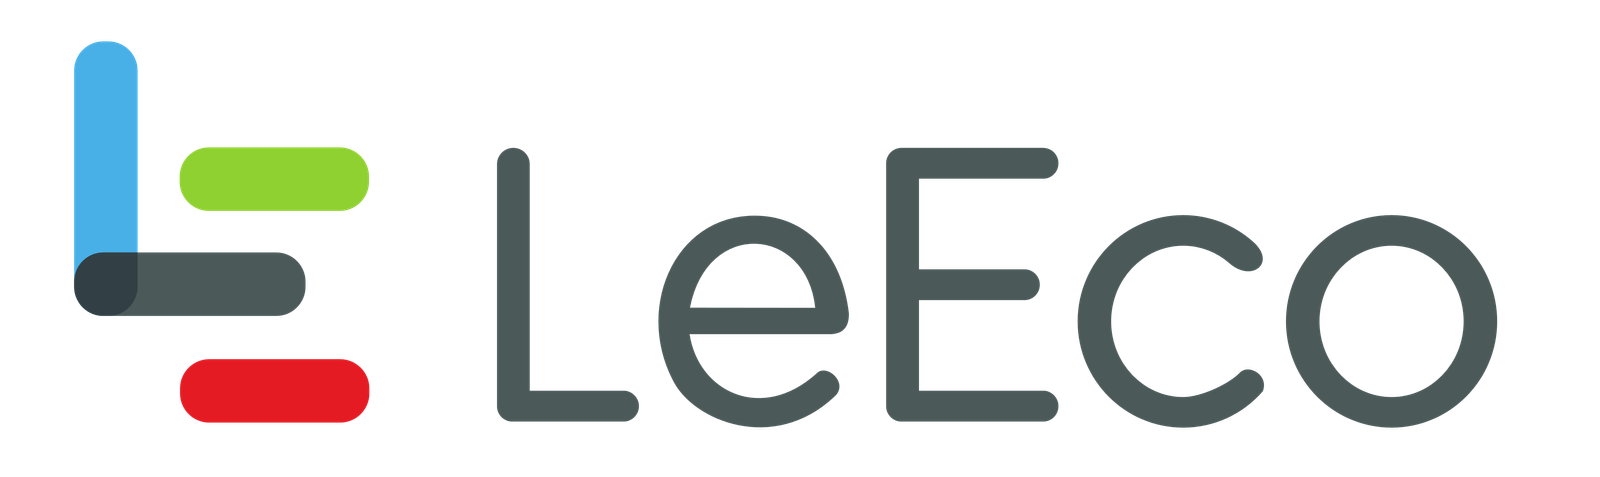 LeEco-Mobile solutions